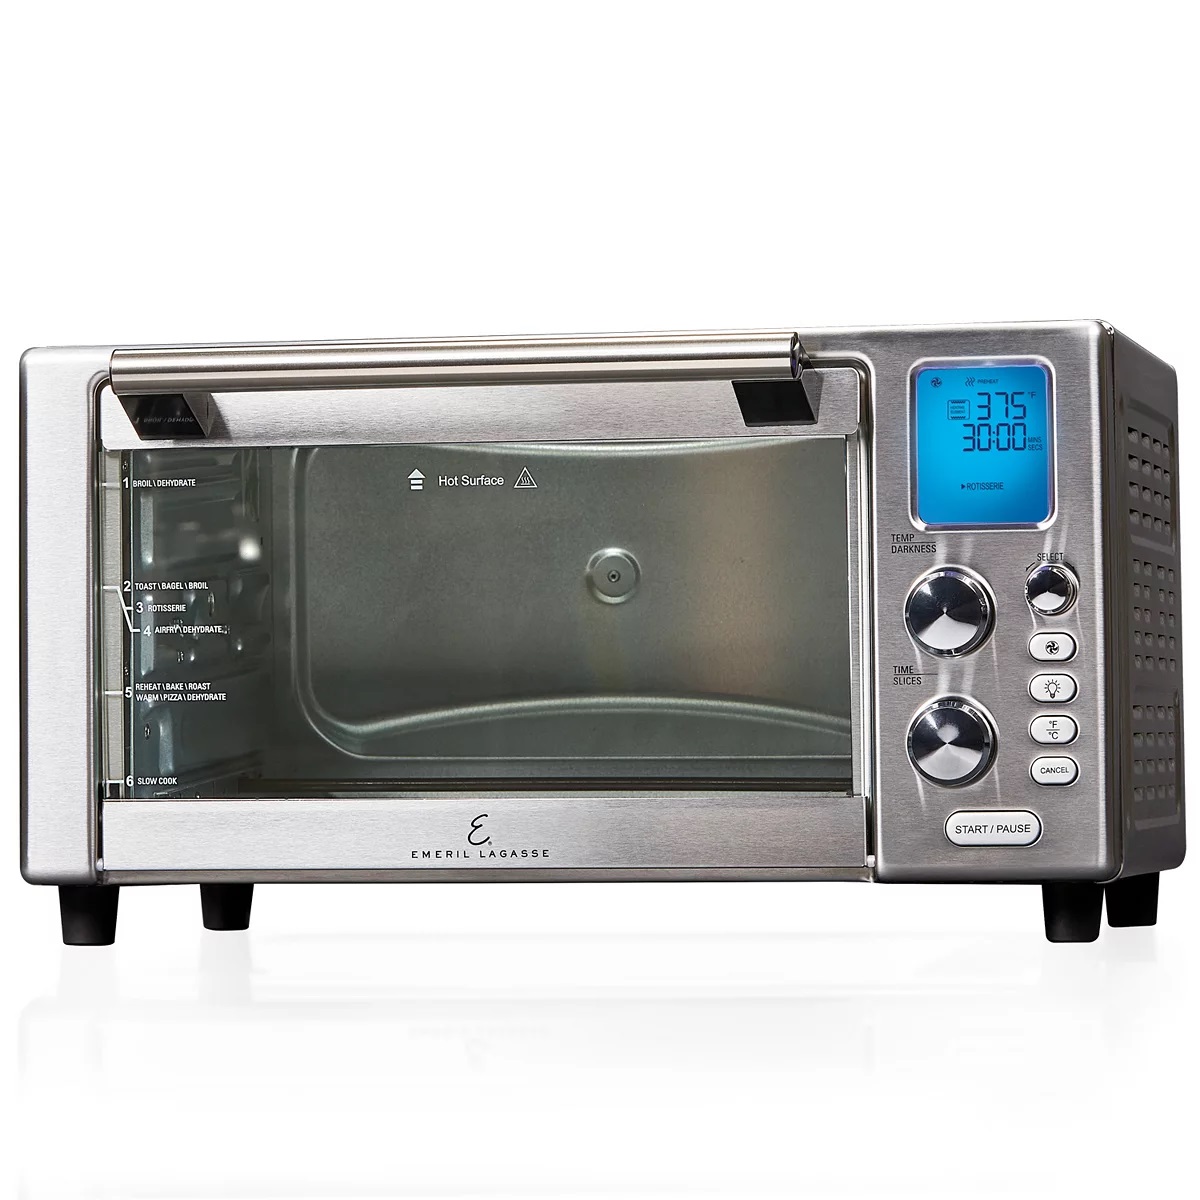 Emeril Lagasse - Air Fry Toaster Oven - Brushed Stainless Steel - image 3 of 5